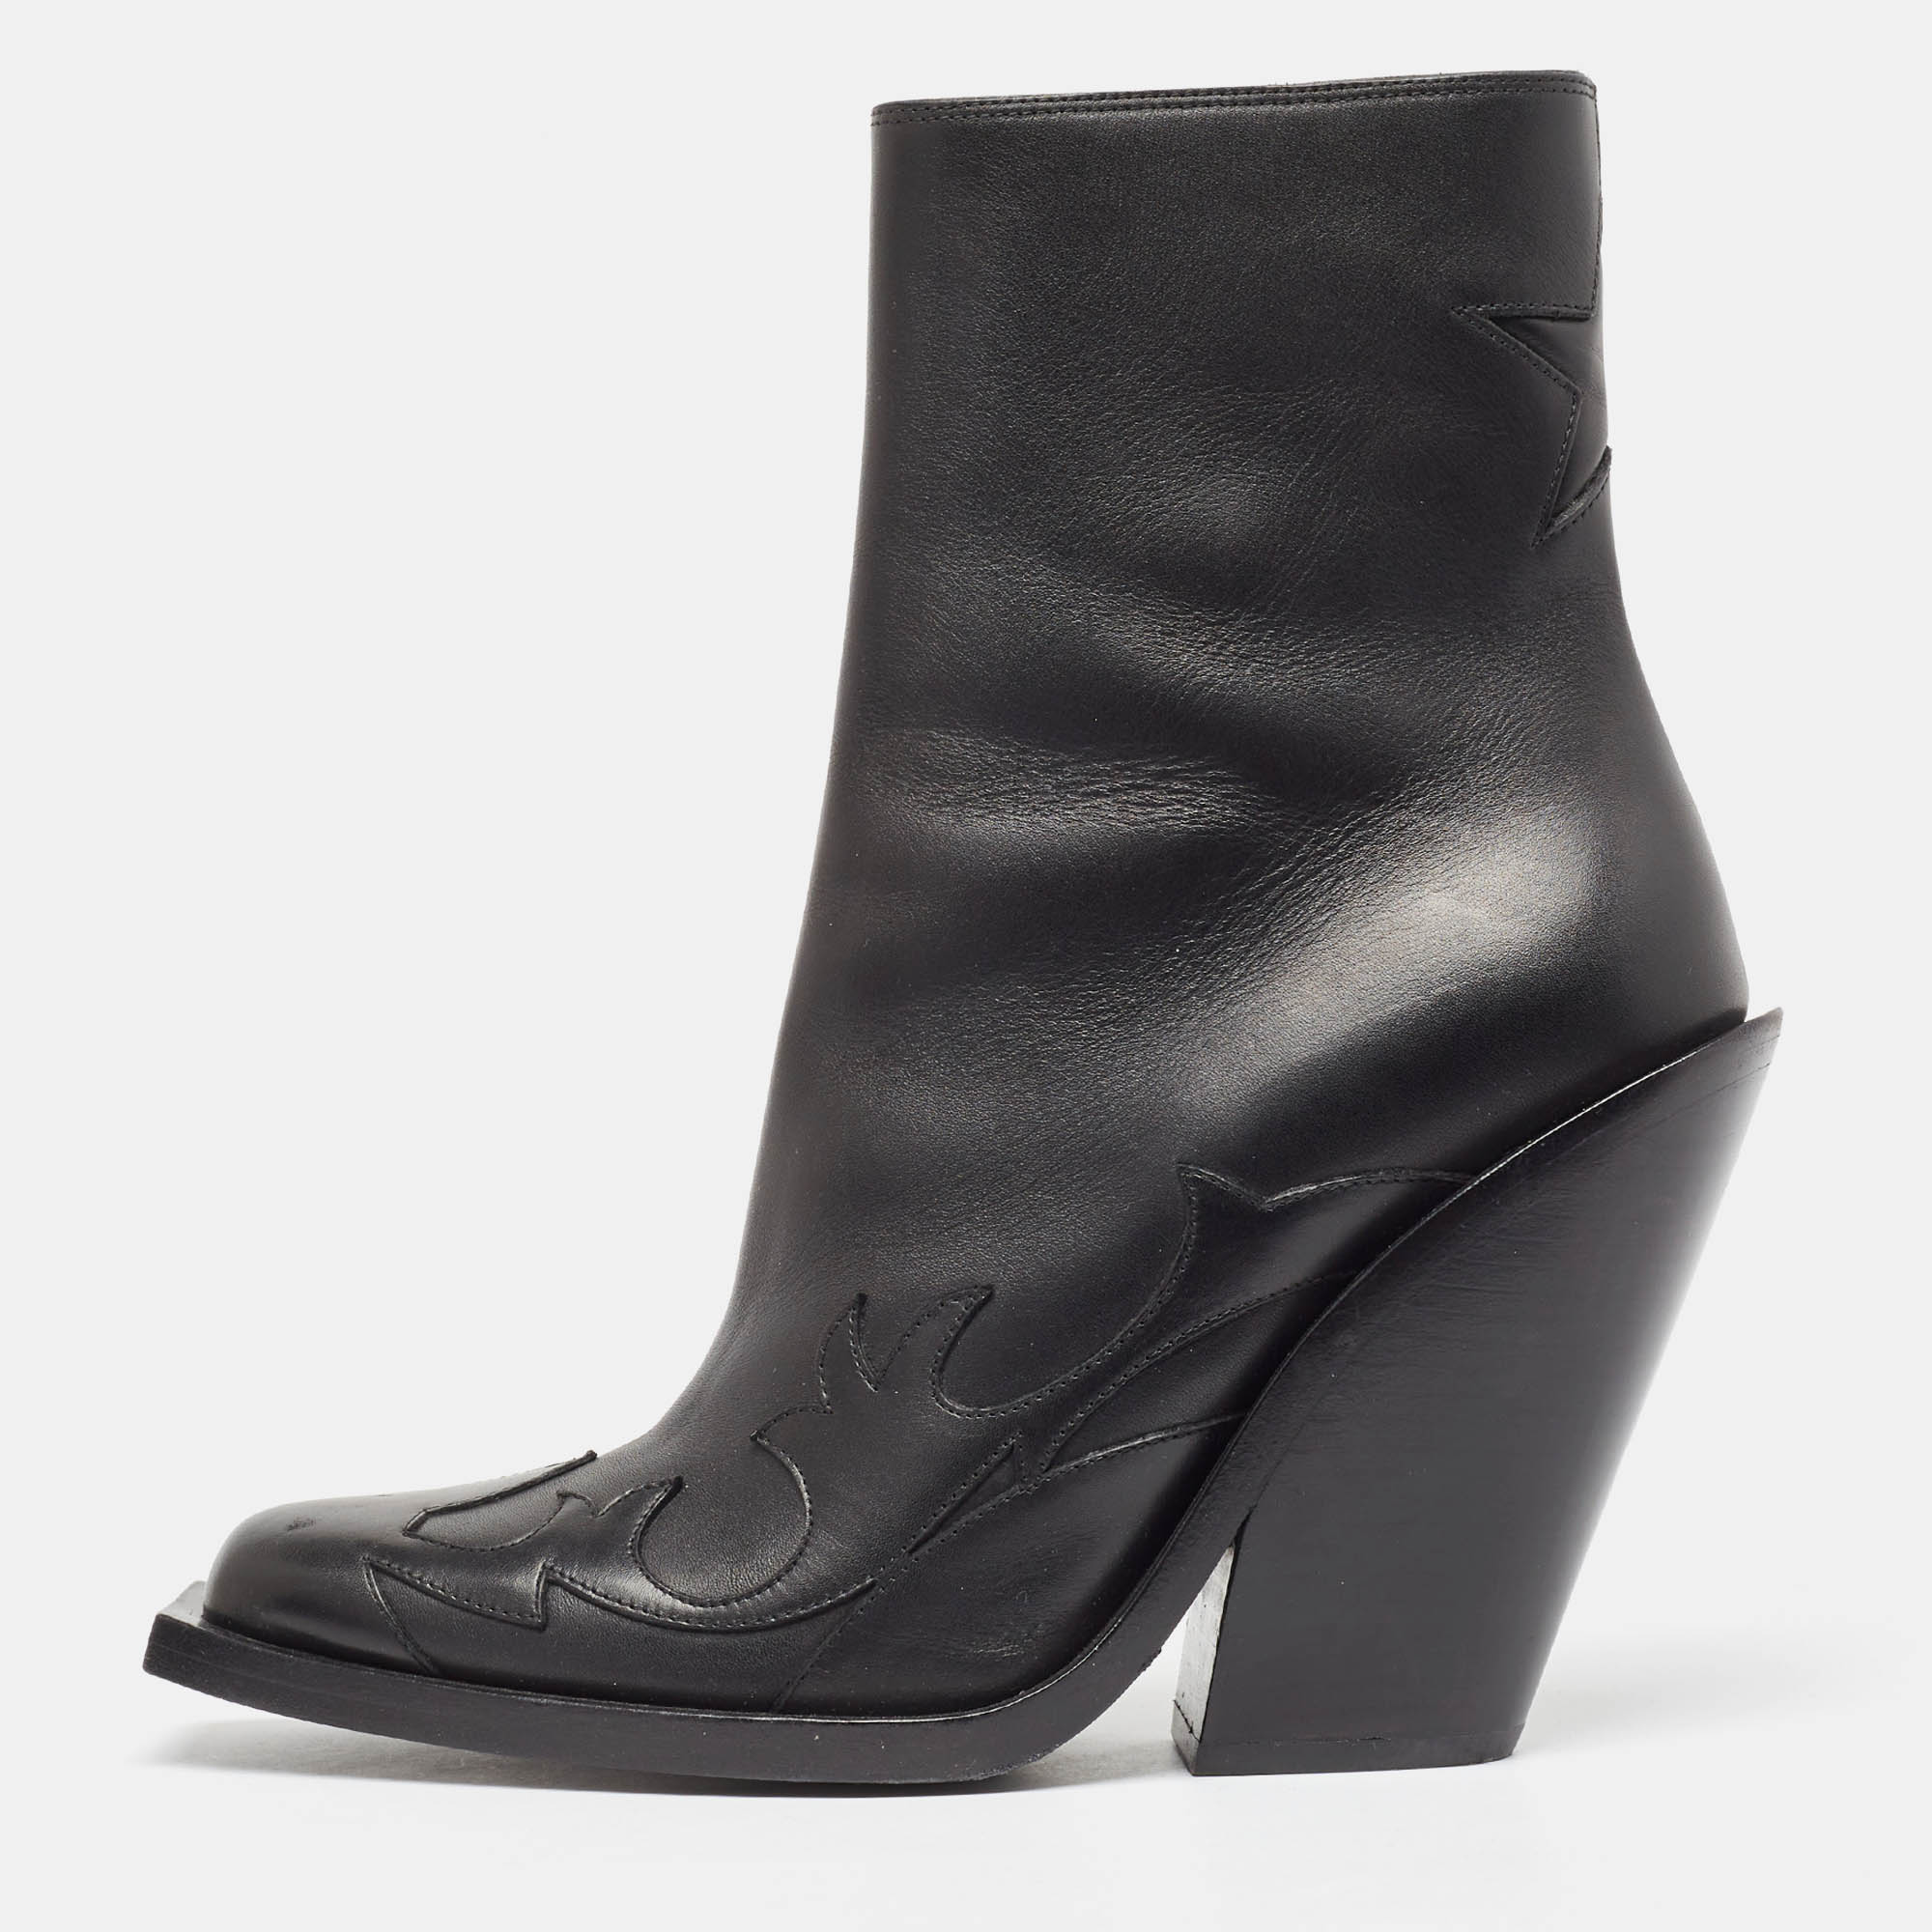 Burberry black leather ankle boots size 39